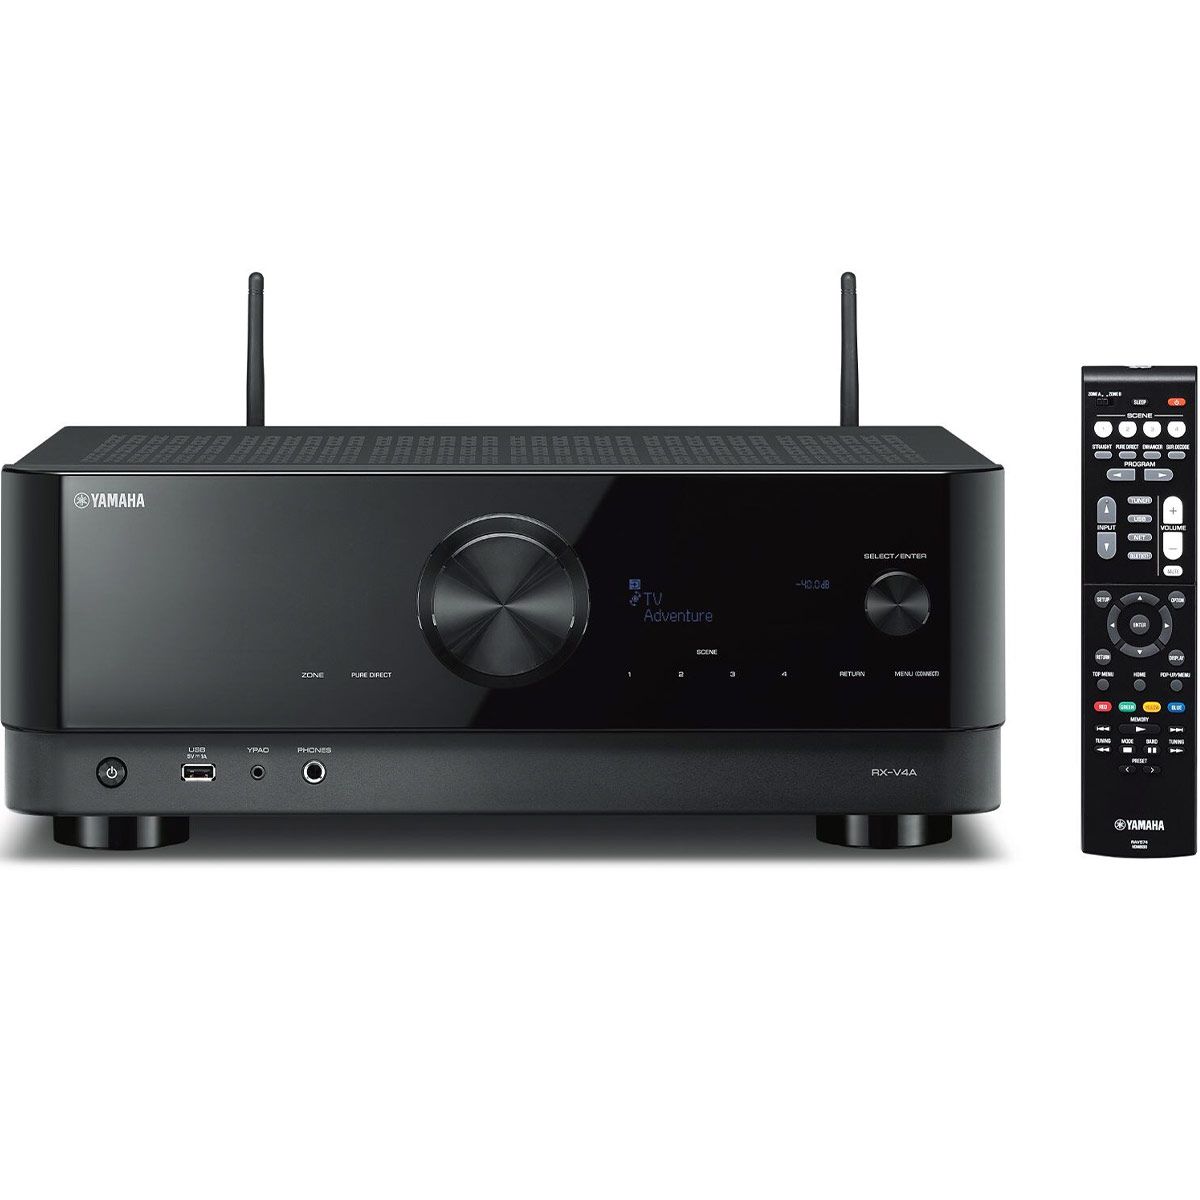 Yamaha RX-V4A 5.2-Channel AV Receiver - front view with remote and wifi antennas